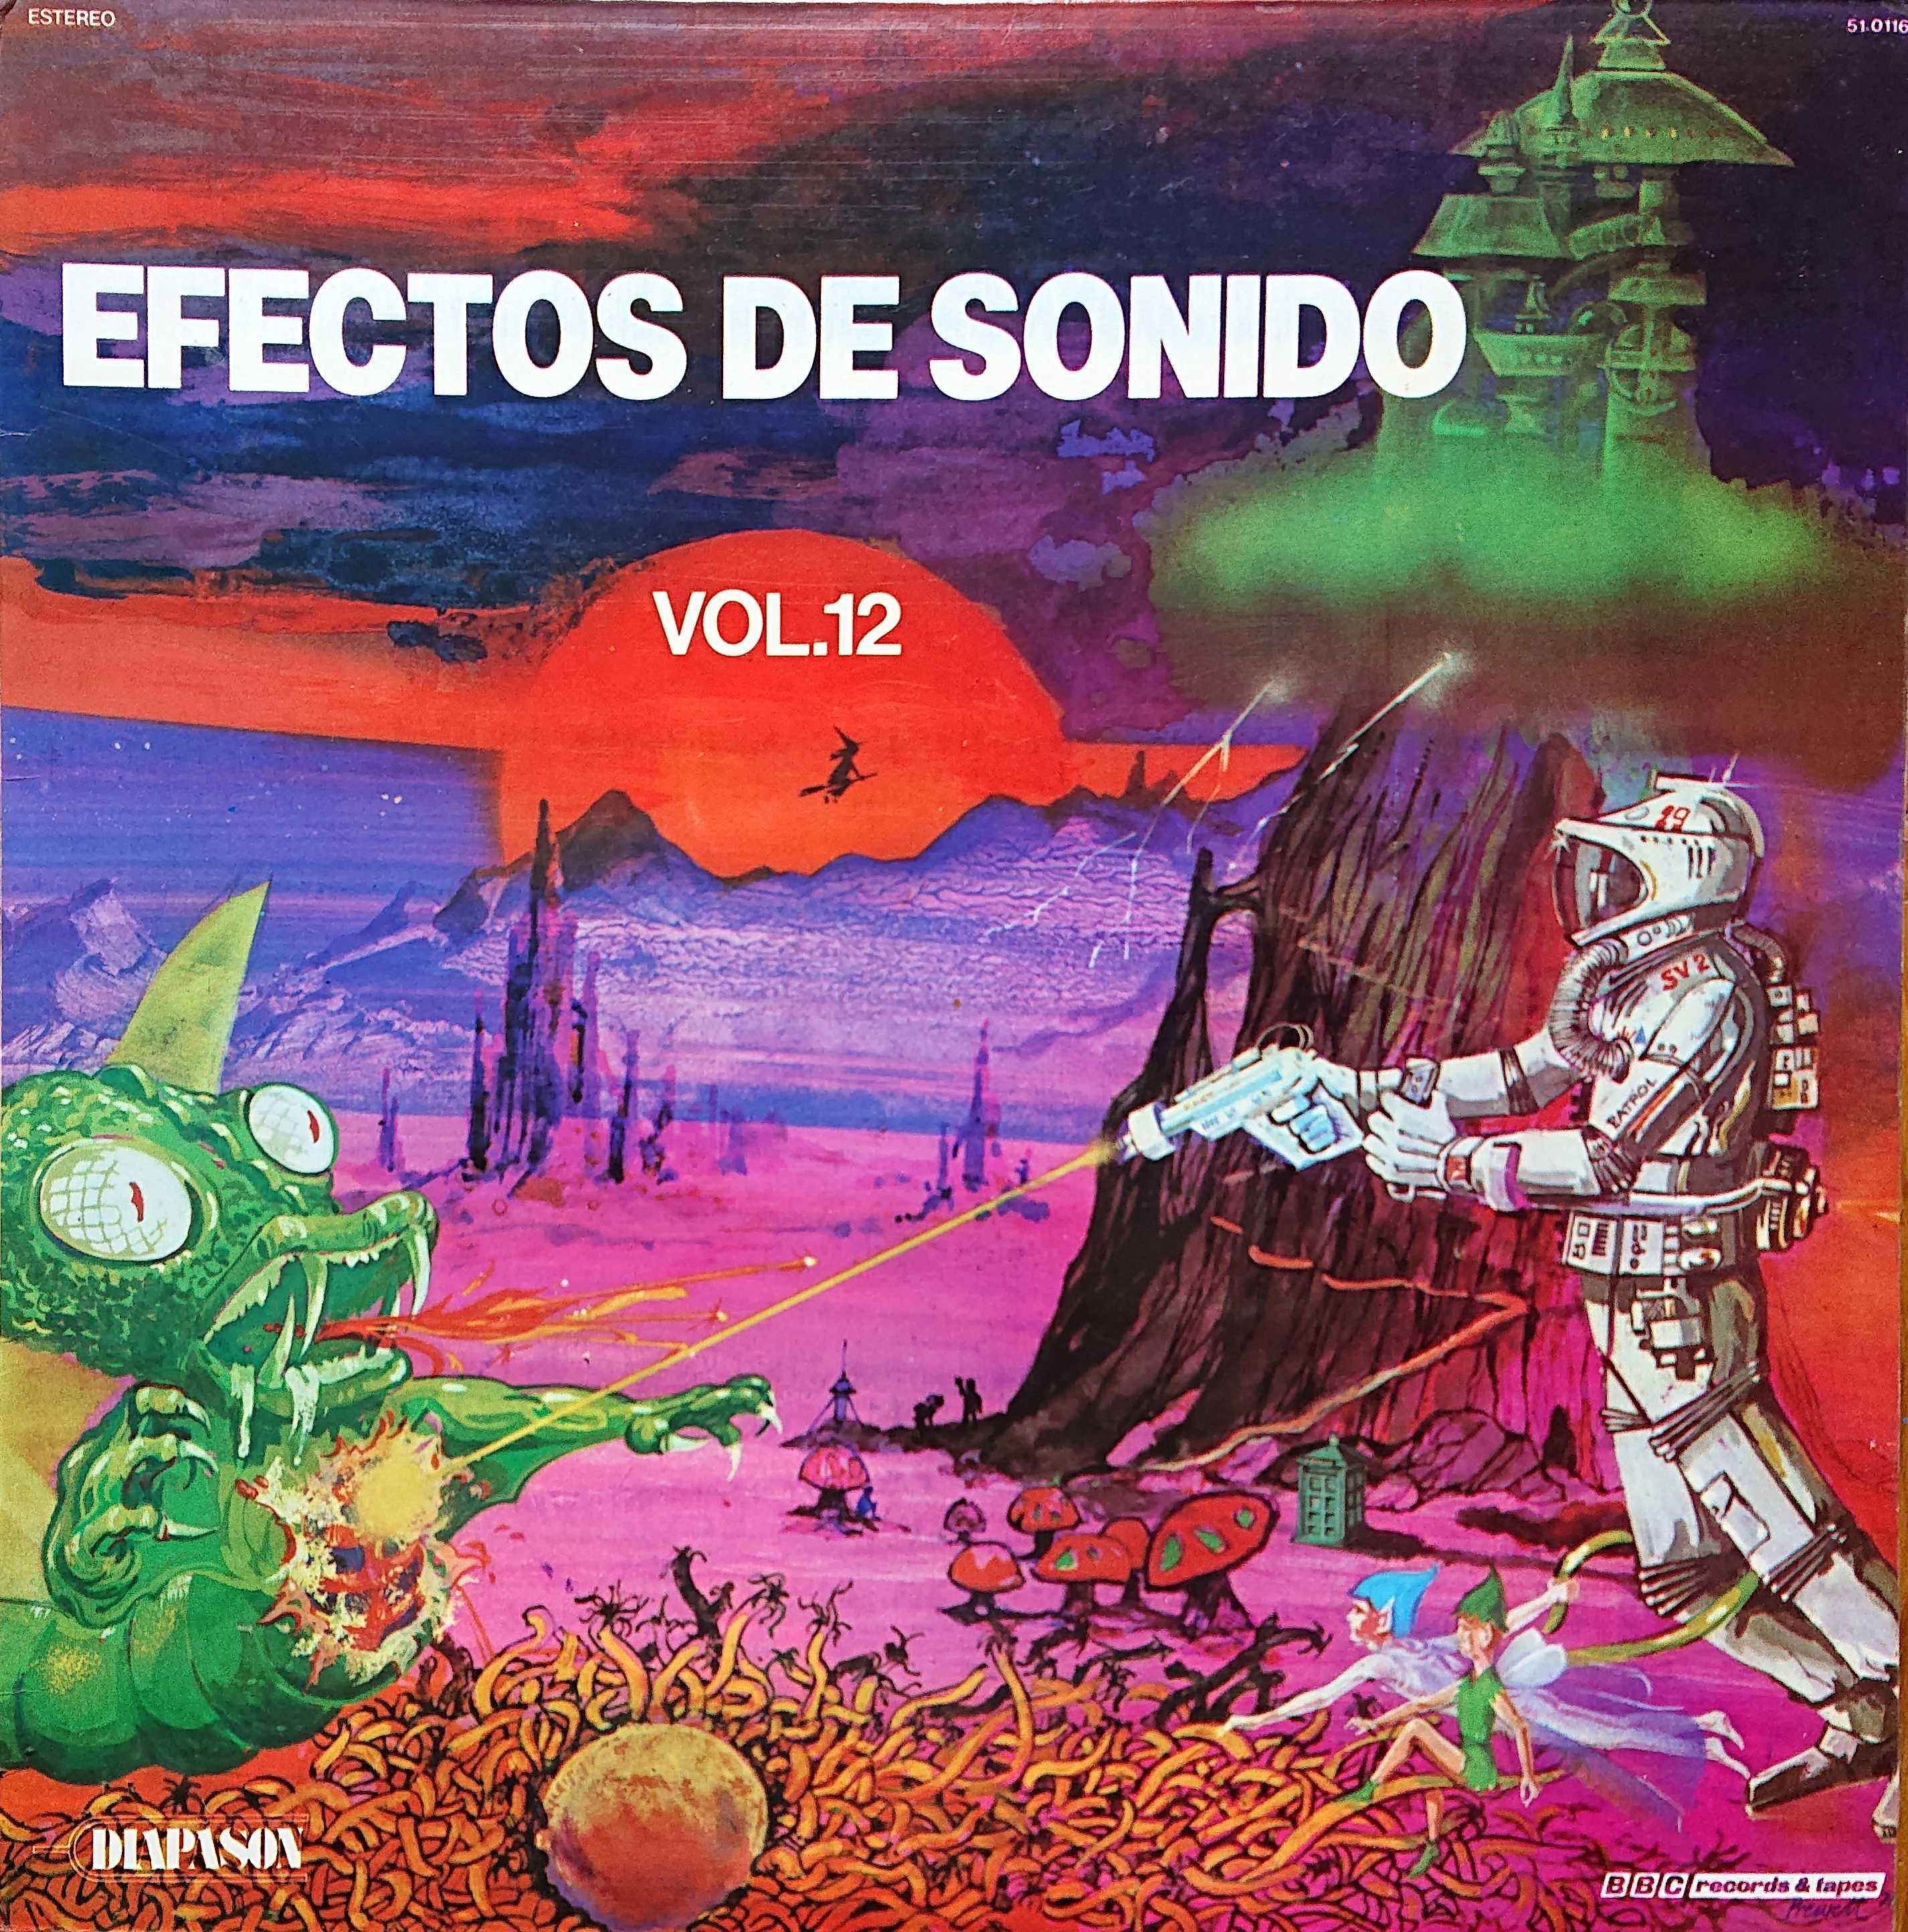 Picture of 51.0116 Efectos de sonido Vol 12 (Spanish import) by artist Various / BBC Radiophonic Workshop from the BBC albums - Records and Tapes library